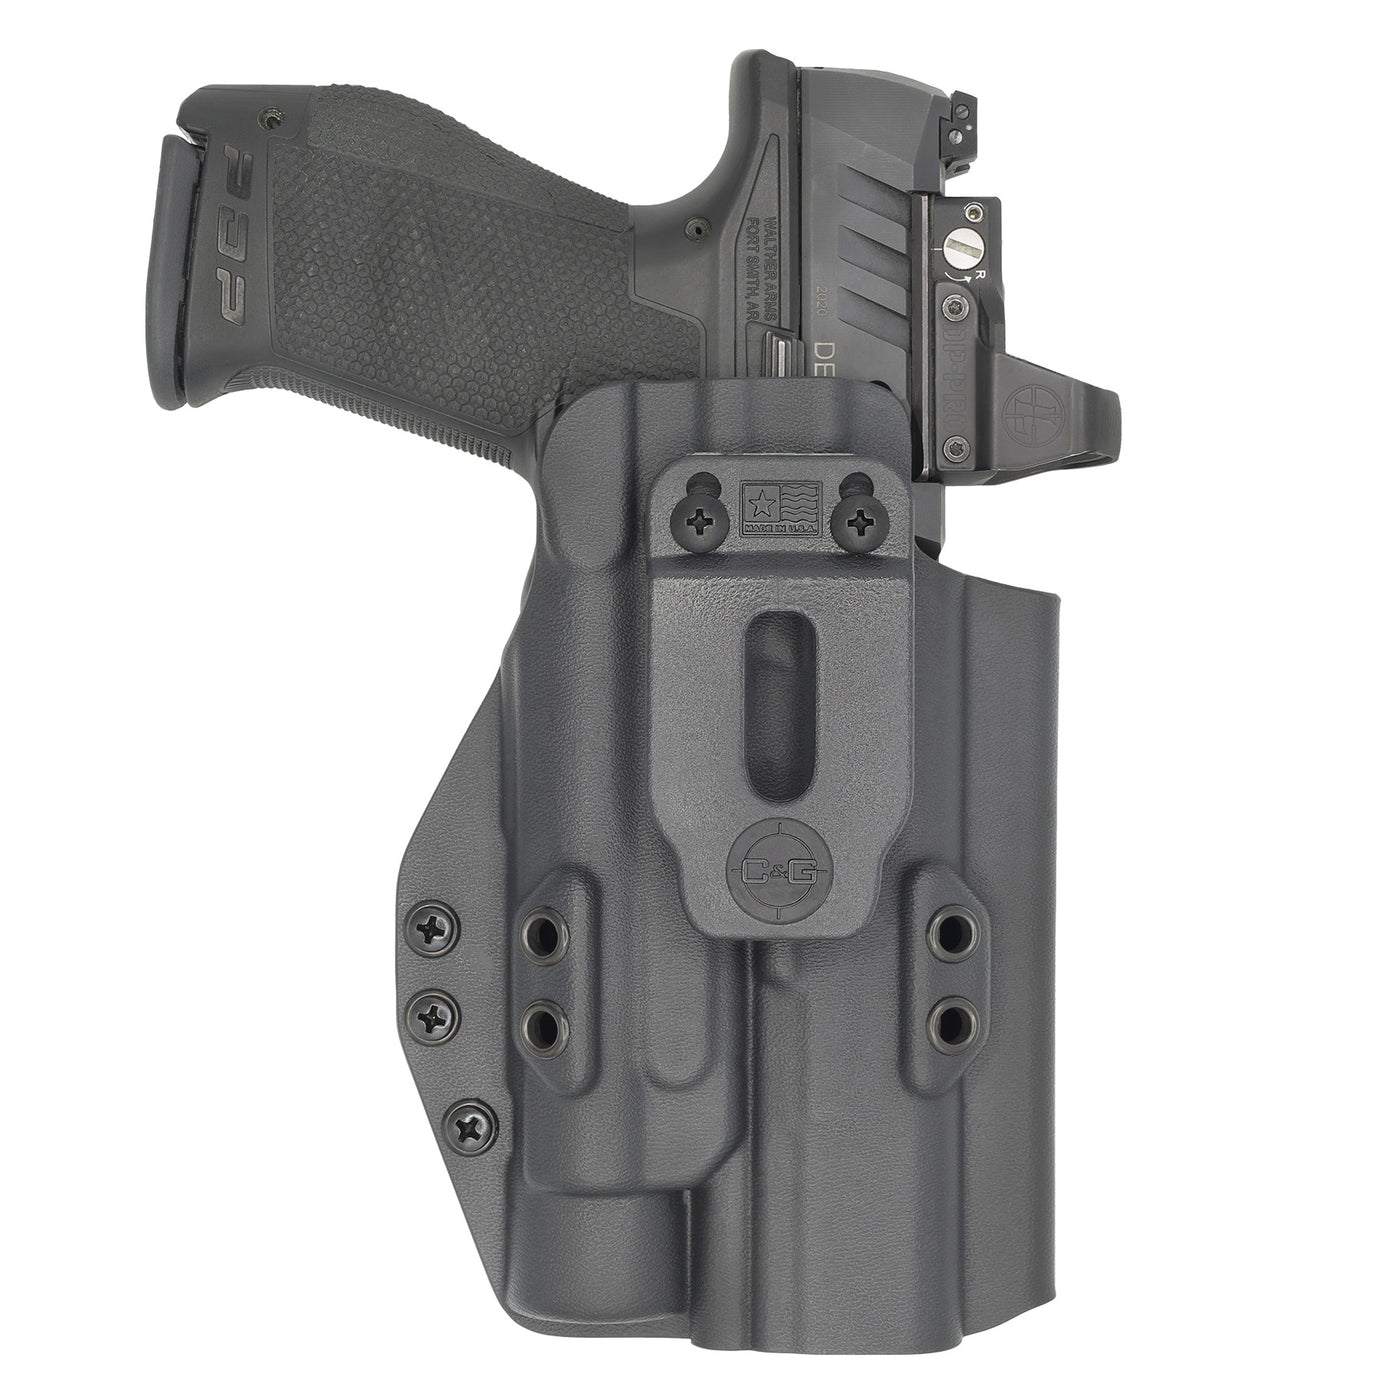 C&G Holsters custom IWB Tactical FN 509 Streamlight TLR1 in holstered position